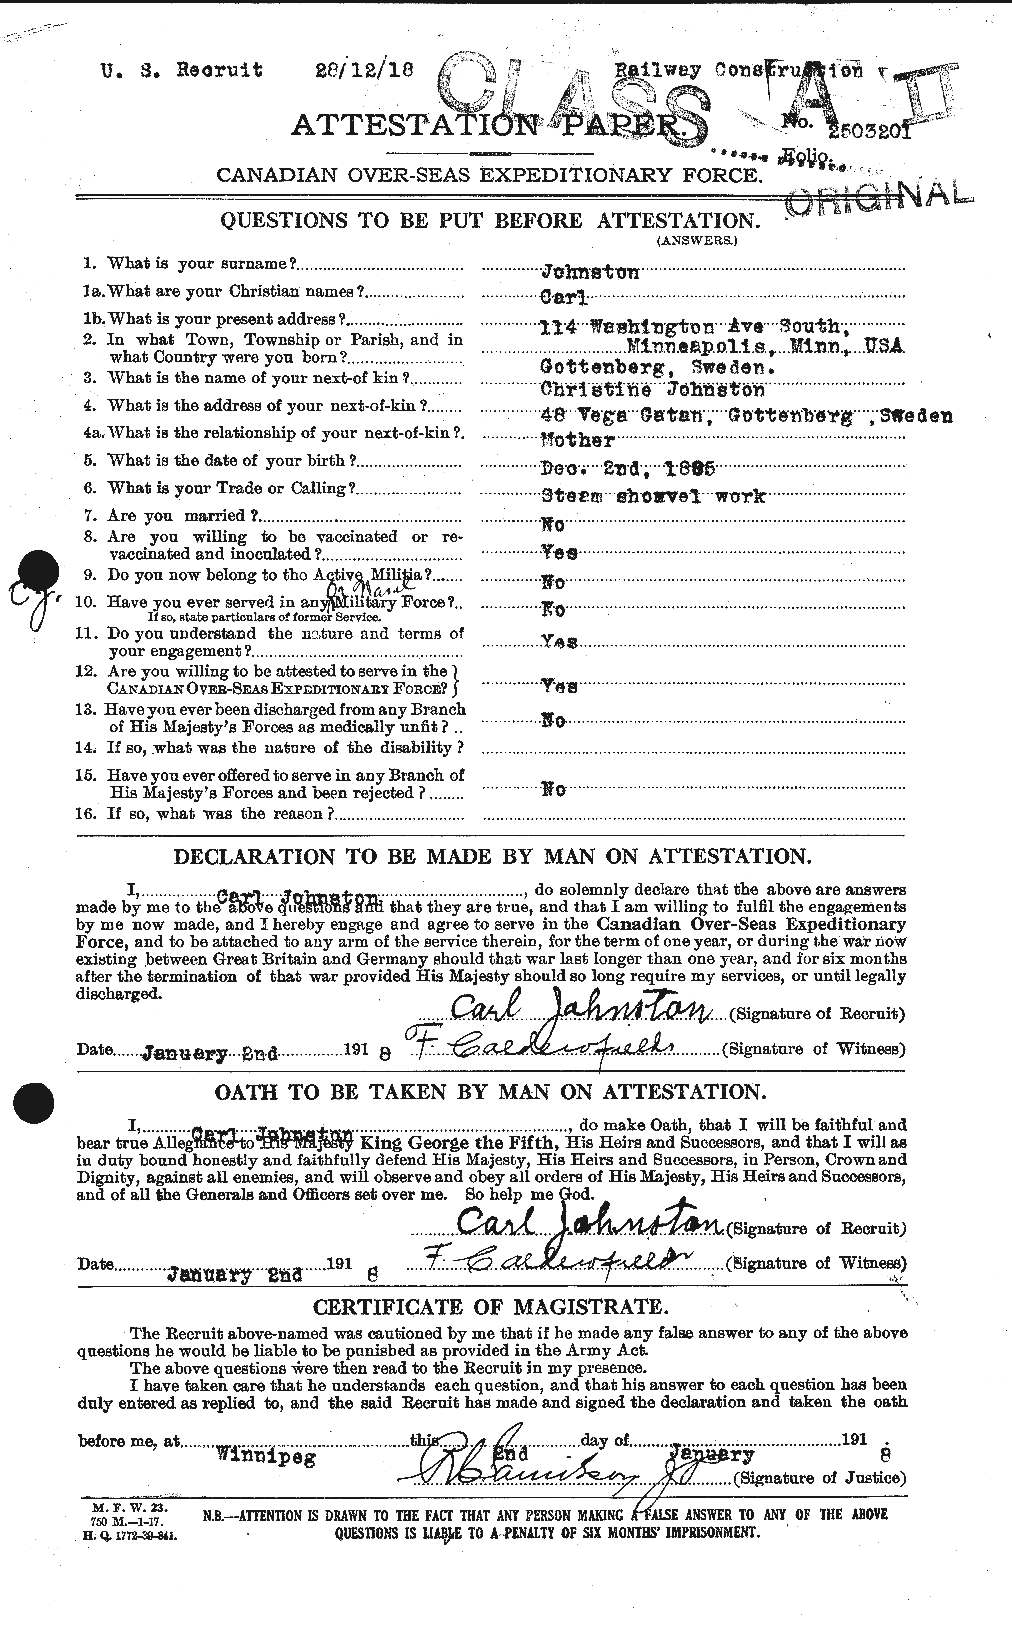 Personnel Records of the First World War - CEF 423080a